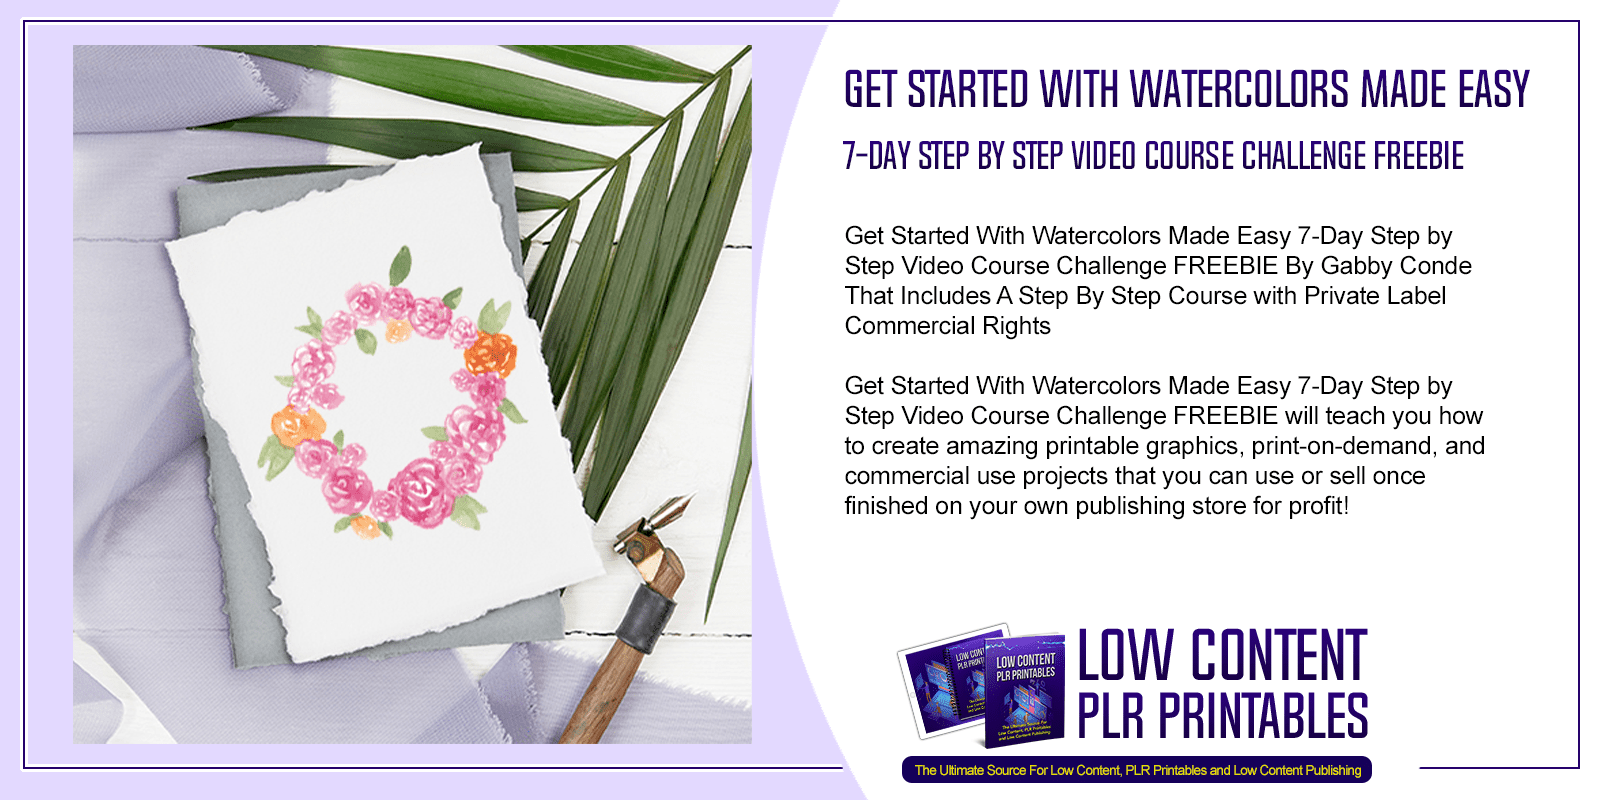 Get Started With Watercolors Made Easy 7 Day Step by Step Video Course Challenge FREEBIE 2